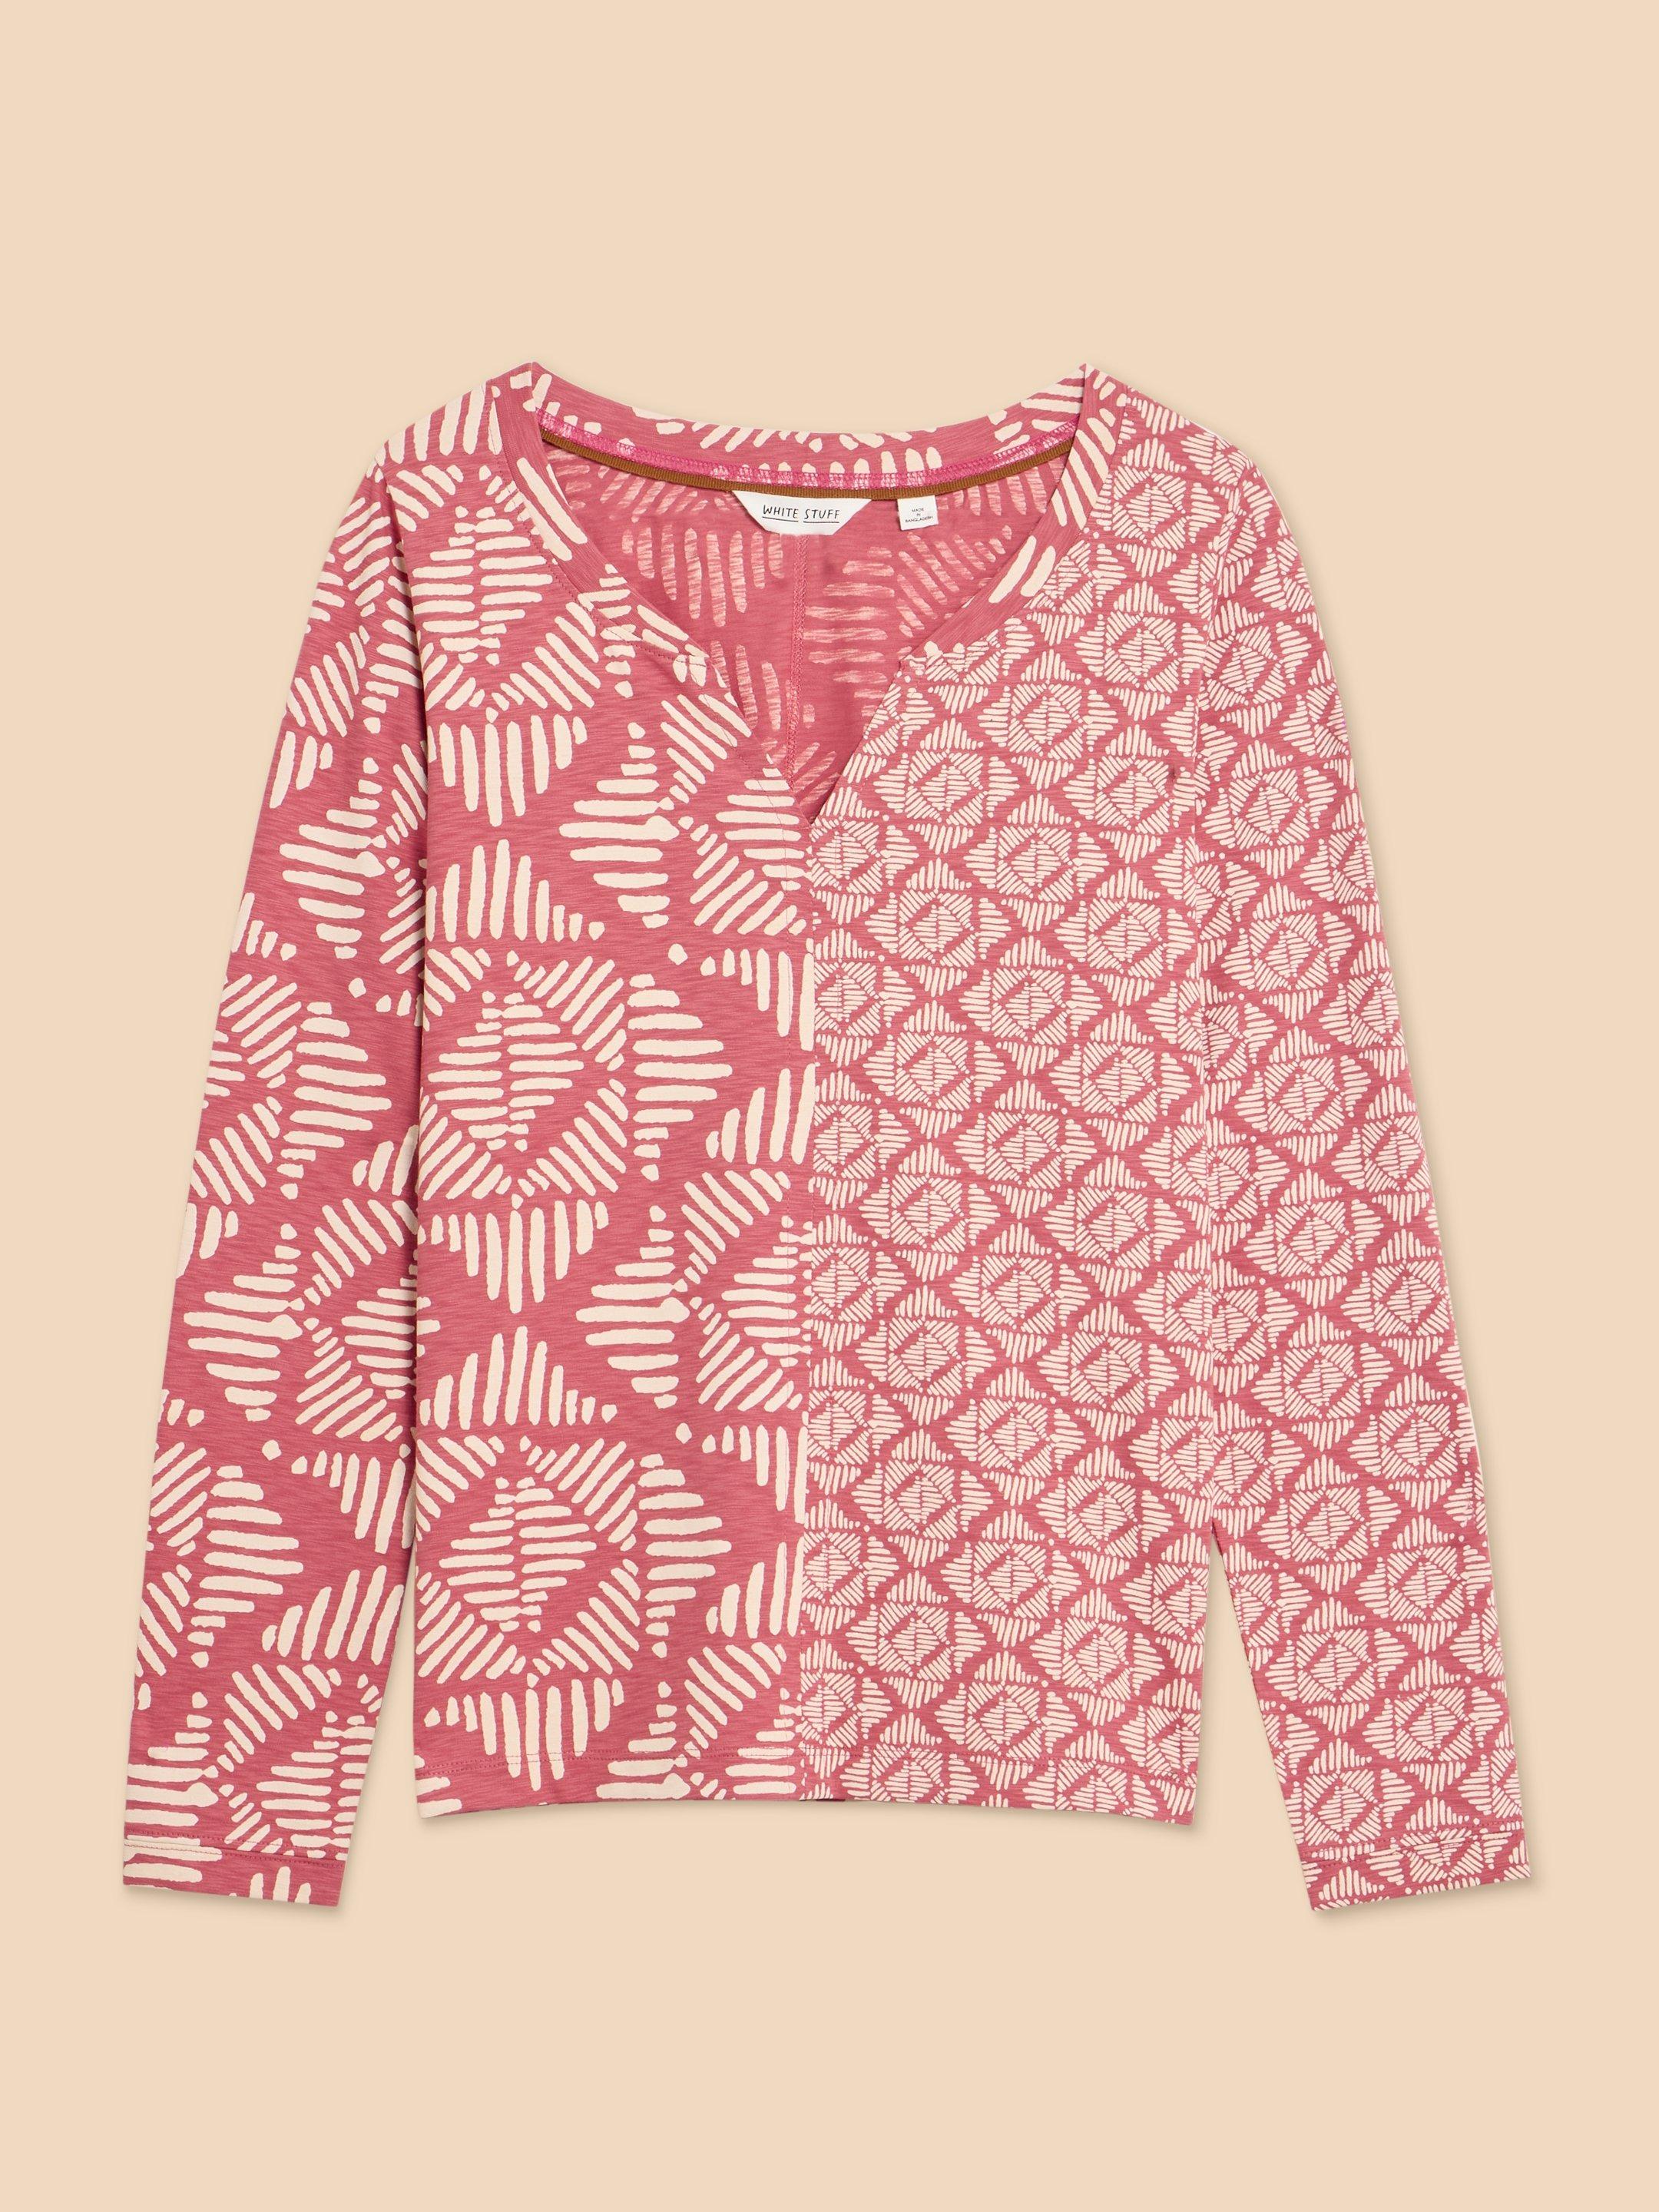 NELLY LS PRINTED TEE in PINK PR - FLAT FRONT